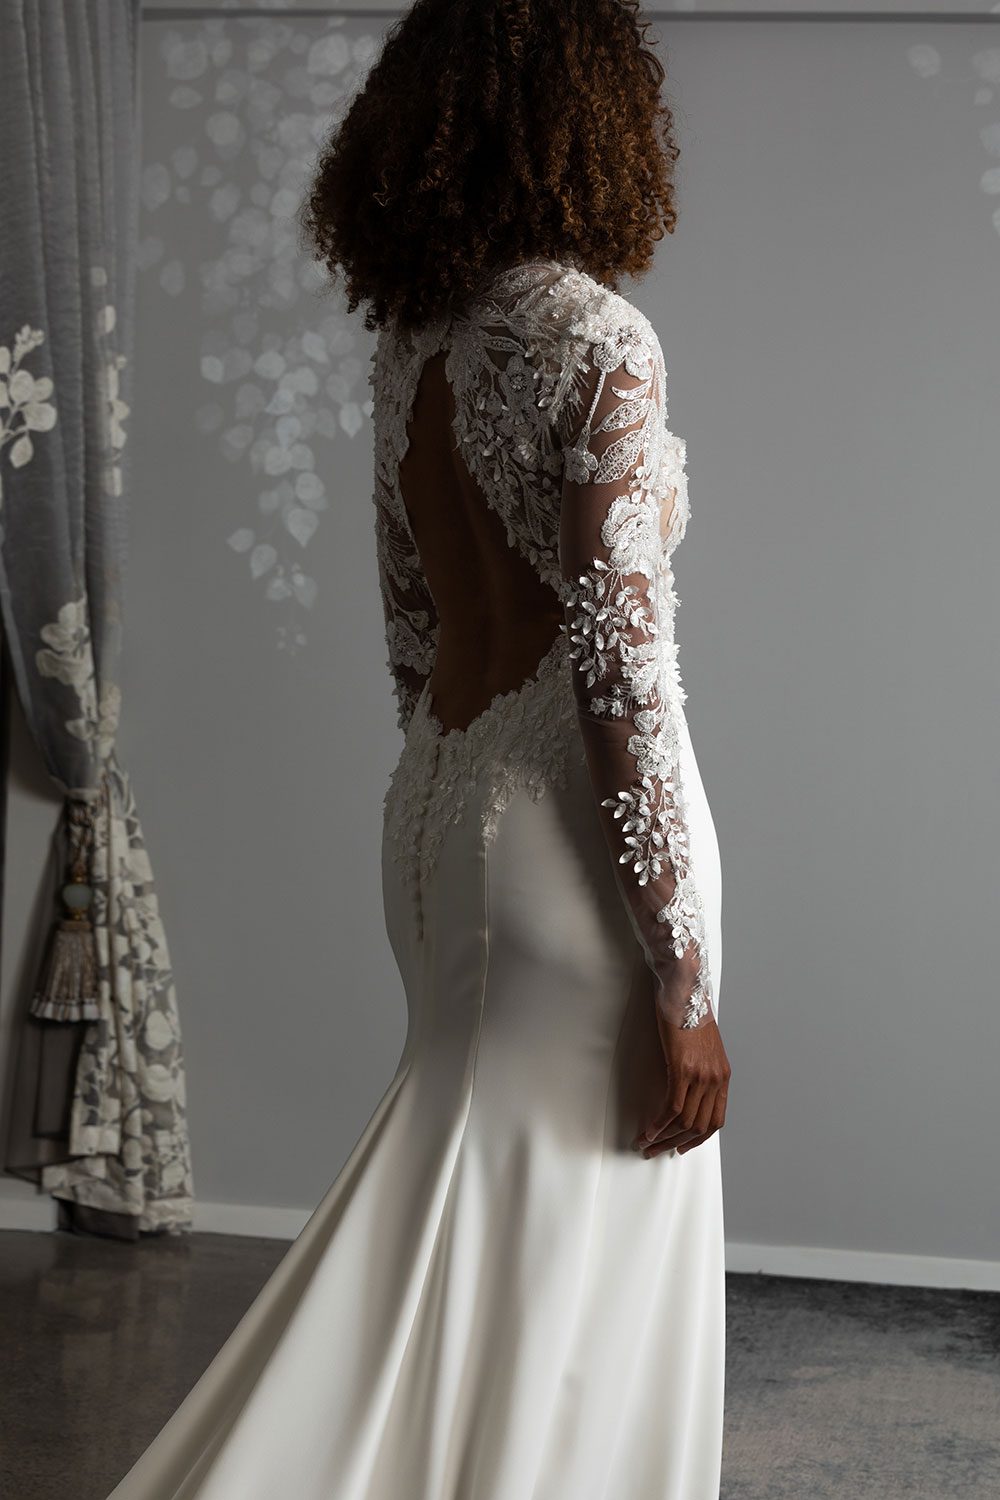 Moana Wedding gown from Vinka Design - Spectacular wedding dress perfect for the modern bride who still wants a classic spark! 3D lace embroidery complemented by a high neckline, fitted sleeves, and stunning low back into a flare train. Model showing close up of back of the gown with cut out 3D lace and embroidered back detail and long train